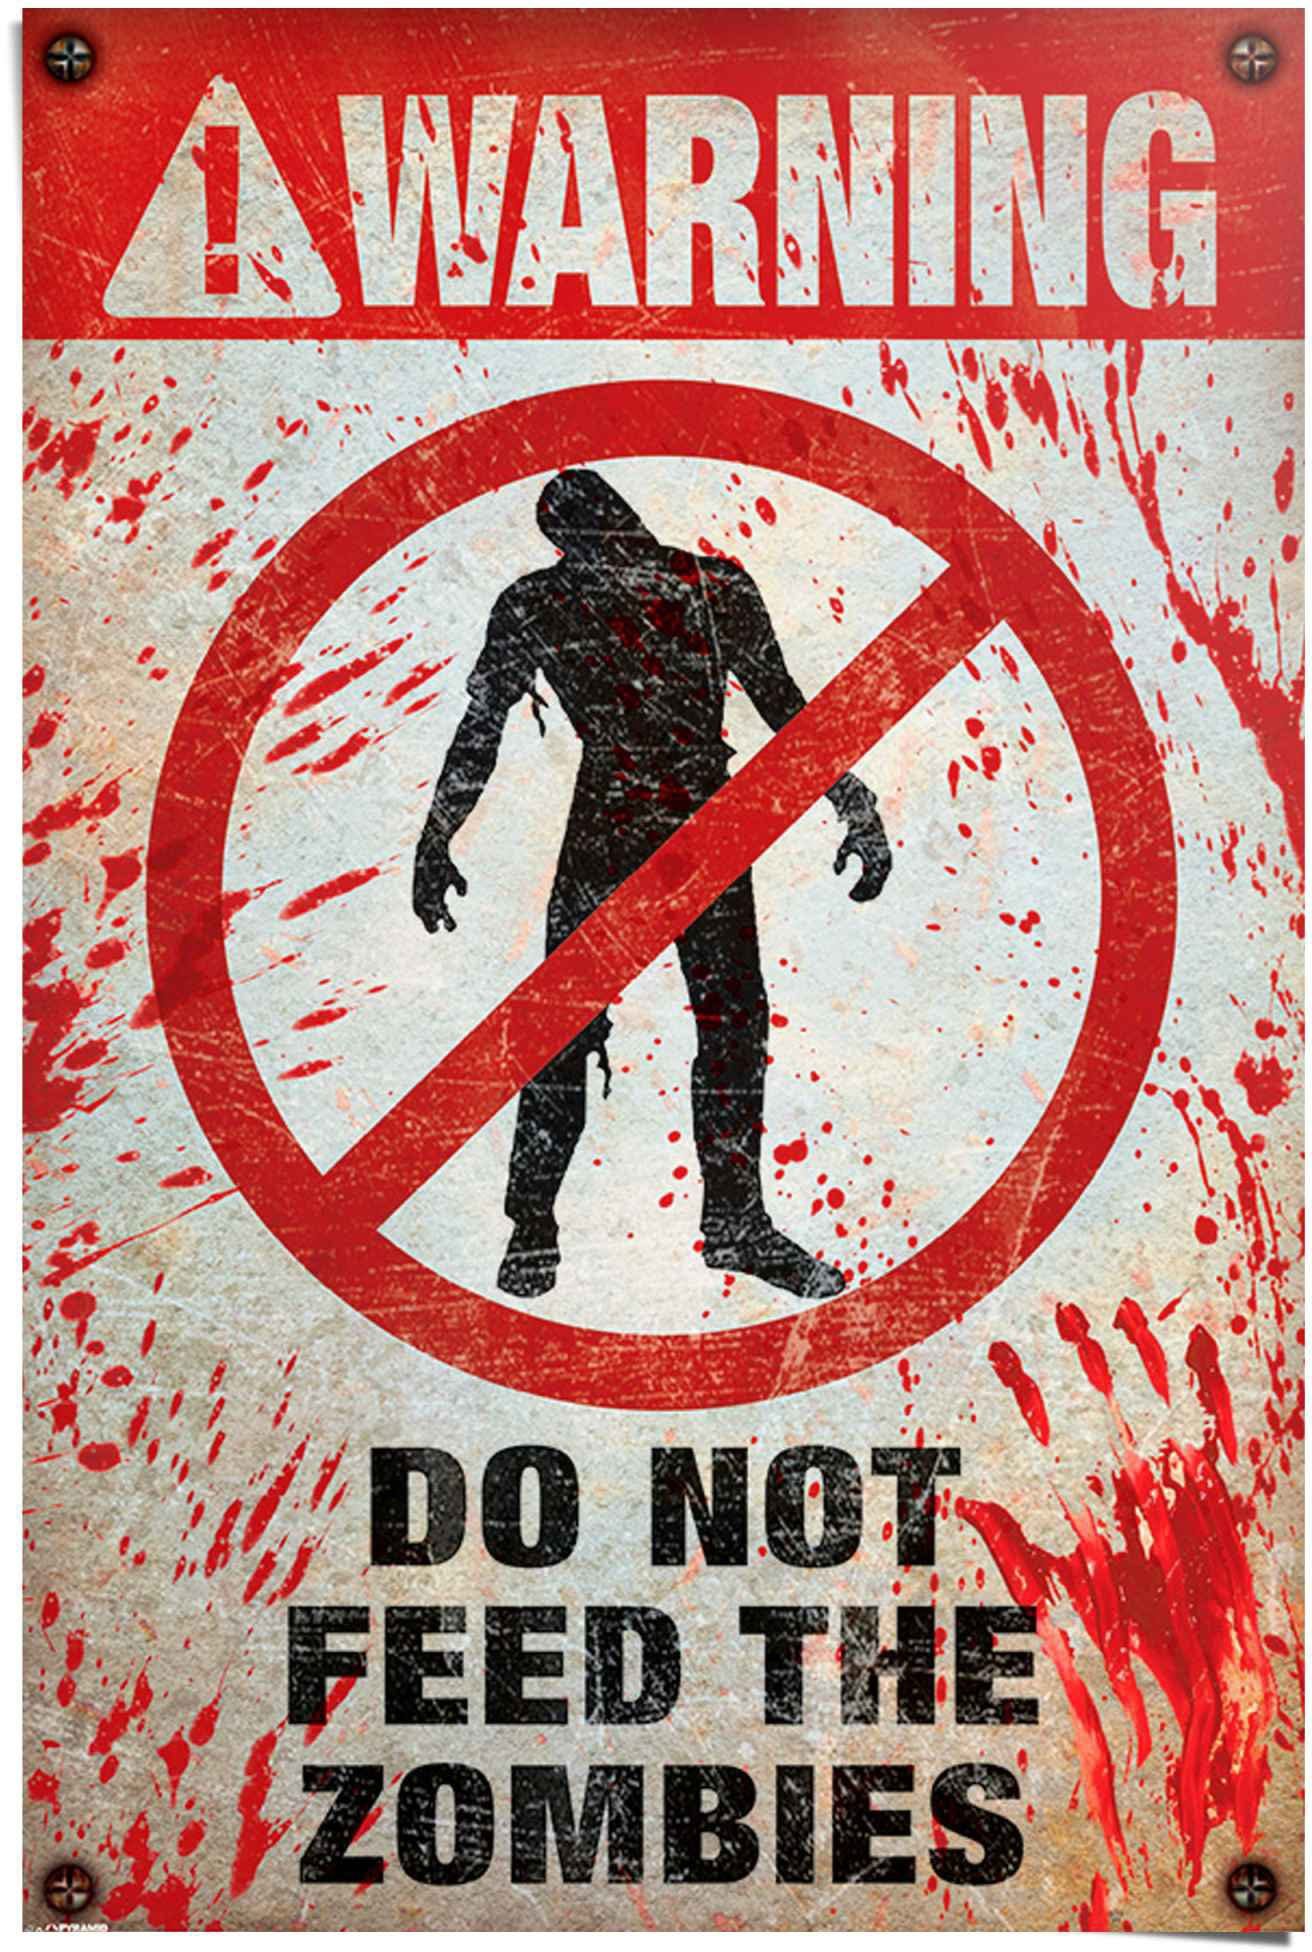 Reinders! Poster Warning! Do Feed (1 Not St) The Zombies